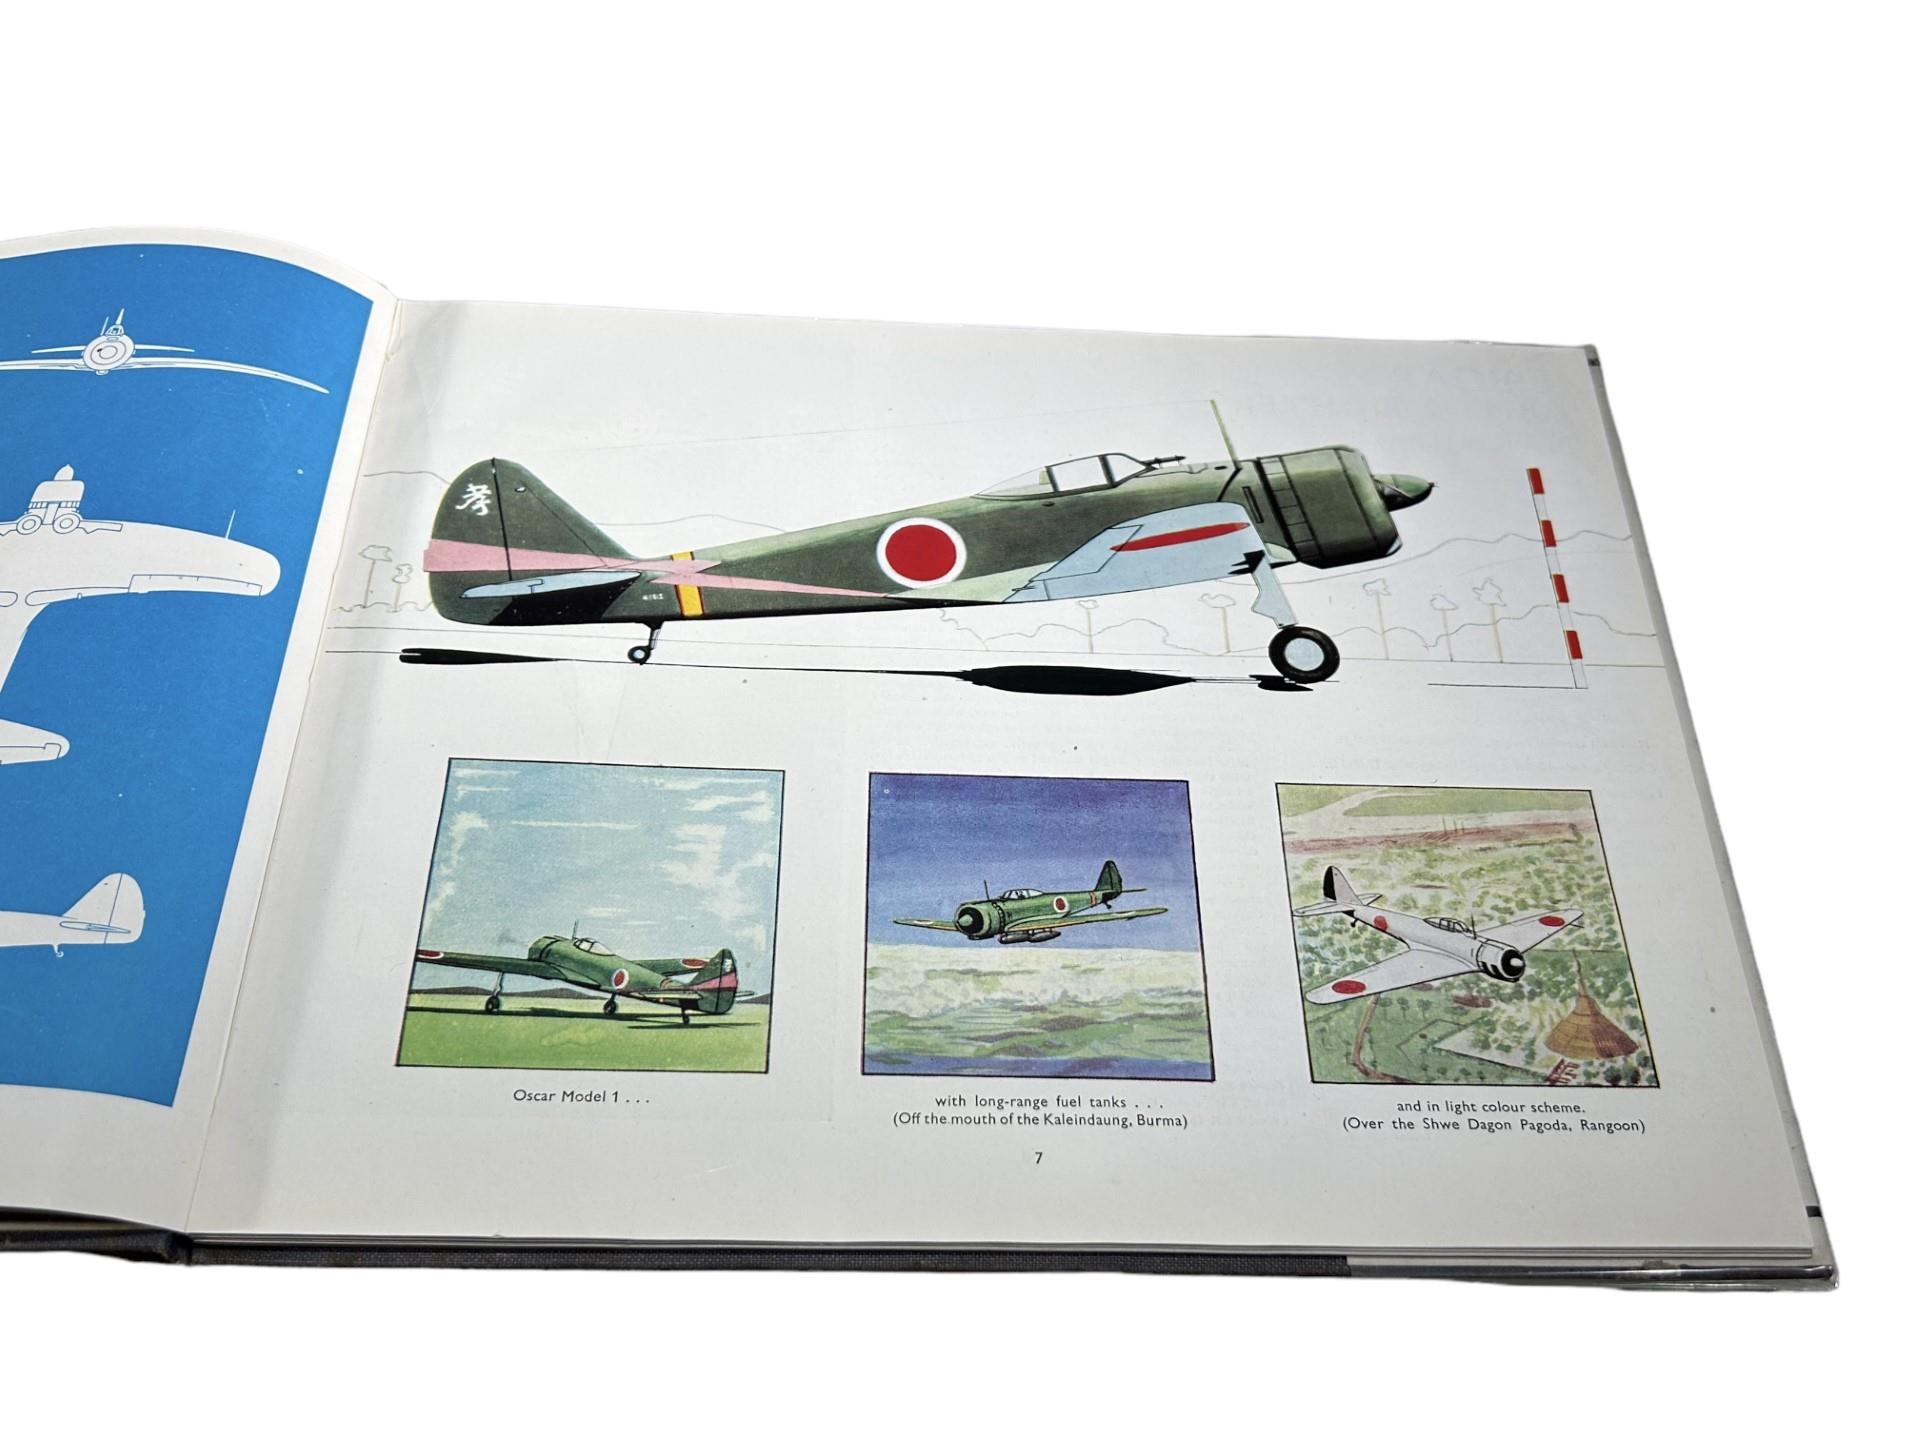 AVIATION INTEREST. A 1945 JAPANESE AIRCRAFT BOOK BY JOHN STROUD. PUBLISHED BY THE HARBOROUGH - Bild 4 aus 4